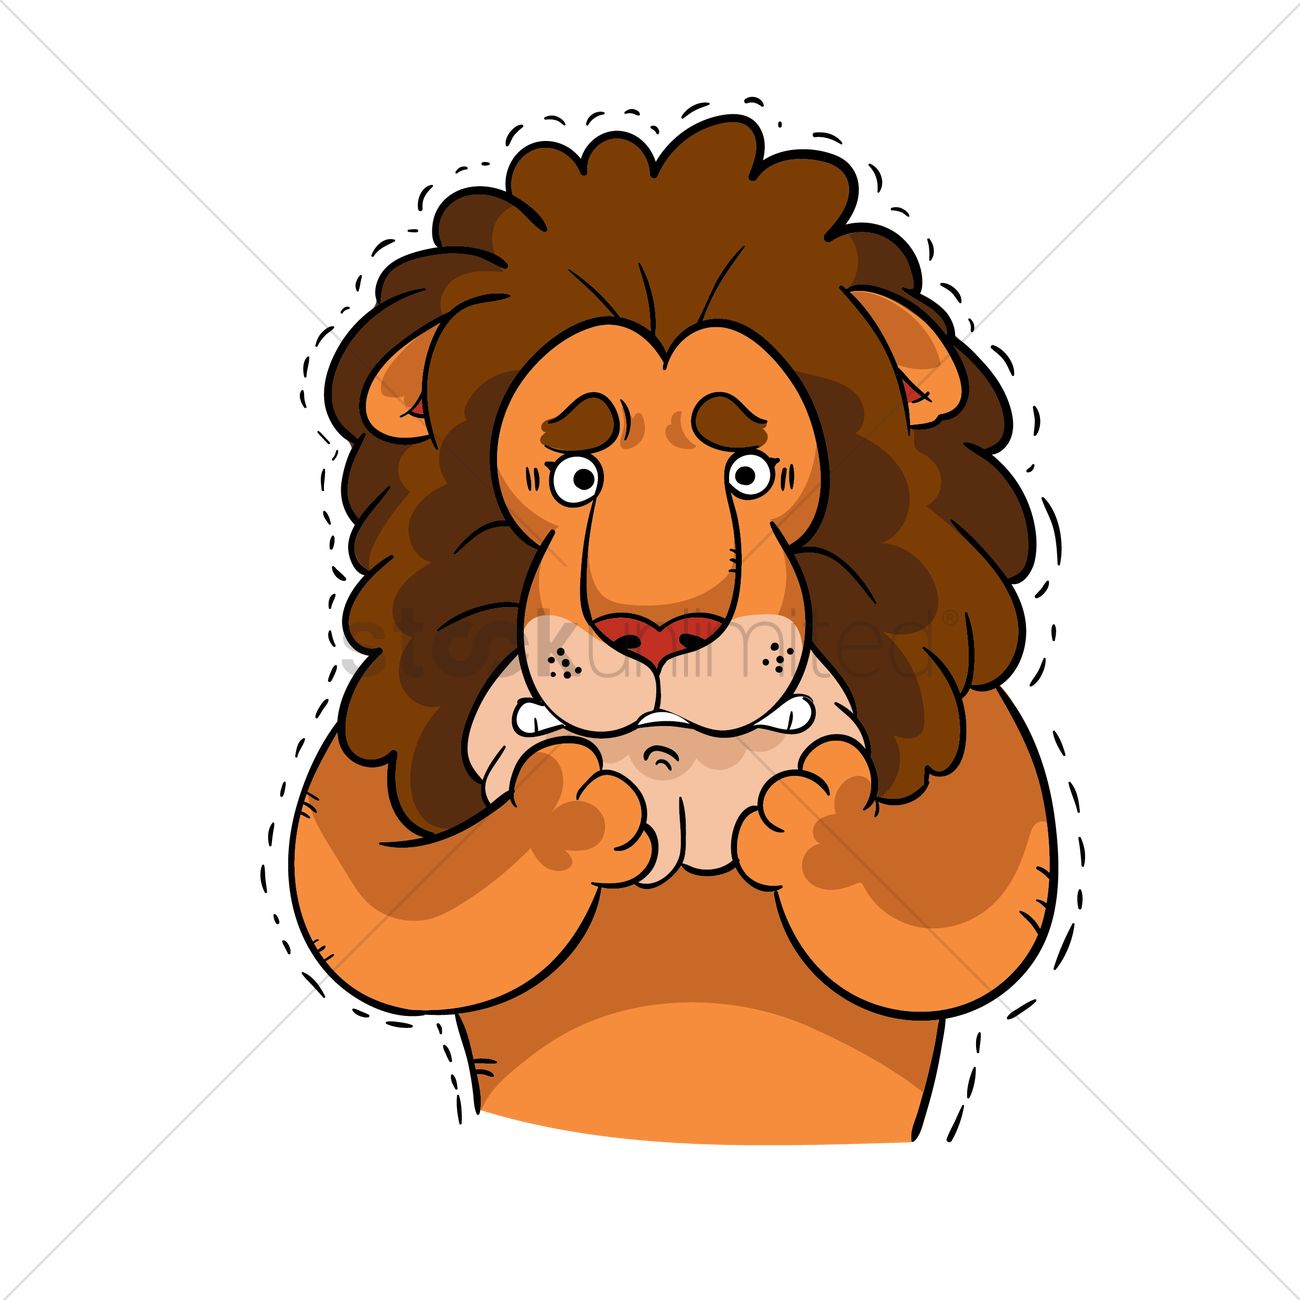 Cartoon lion shivering Vector Image - 1957555 | StockUnlimited